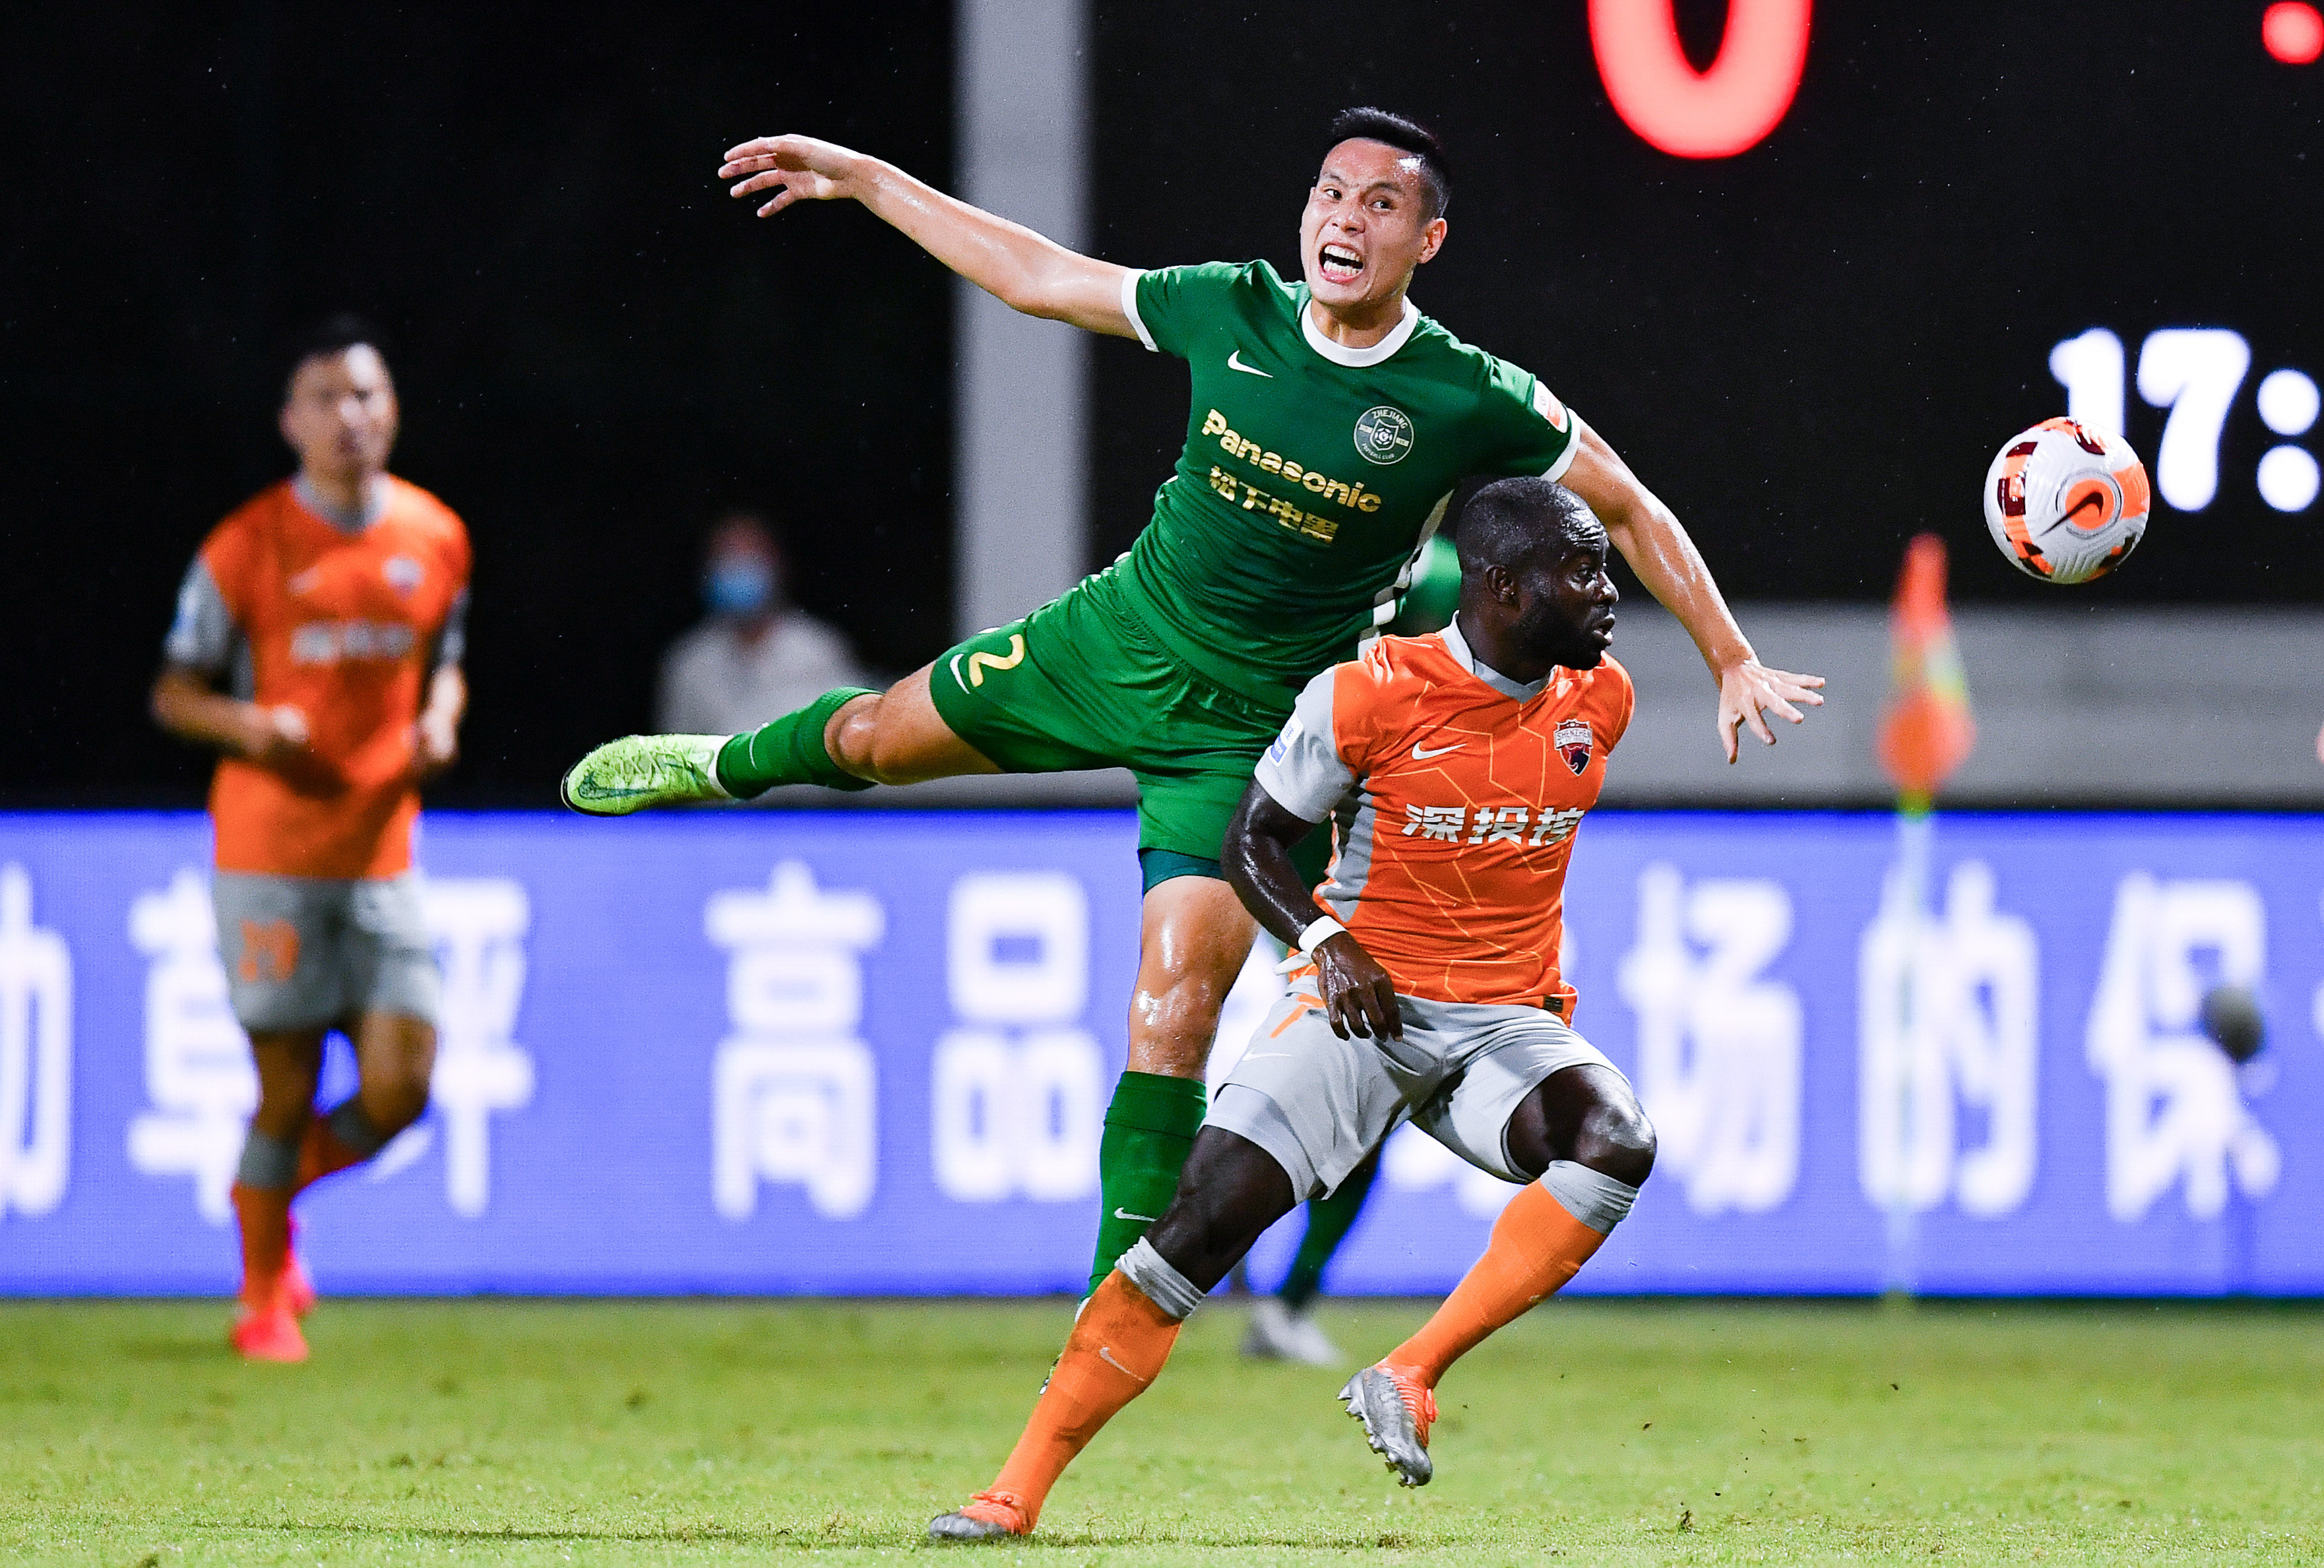 Shenzhen’s Frank Acheampong (right) battles for the ball with Zhejiang’s Liang Nuoheng during a Chinese Super League match in Haikou on Friday August 5. Photo: Xinhua